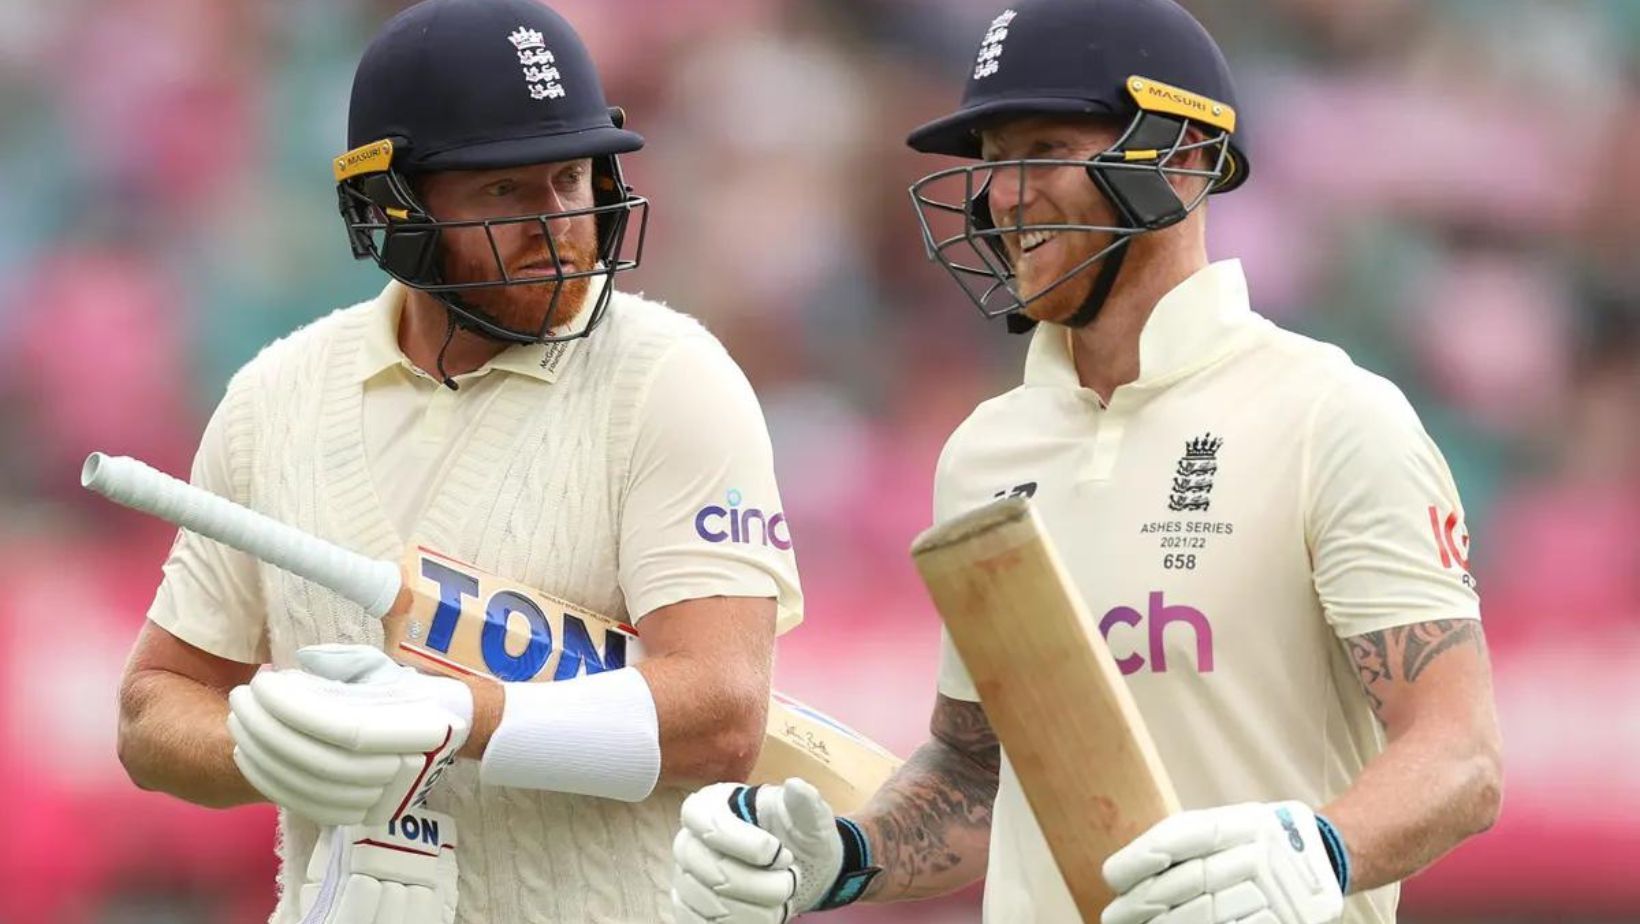 Jonny Bairstow and Ben Stokes (R). (PC: Mark Kolbe/Getty Images)